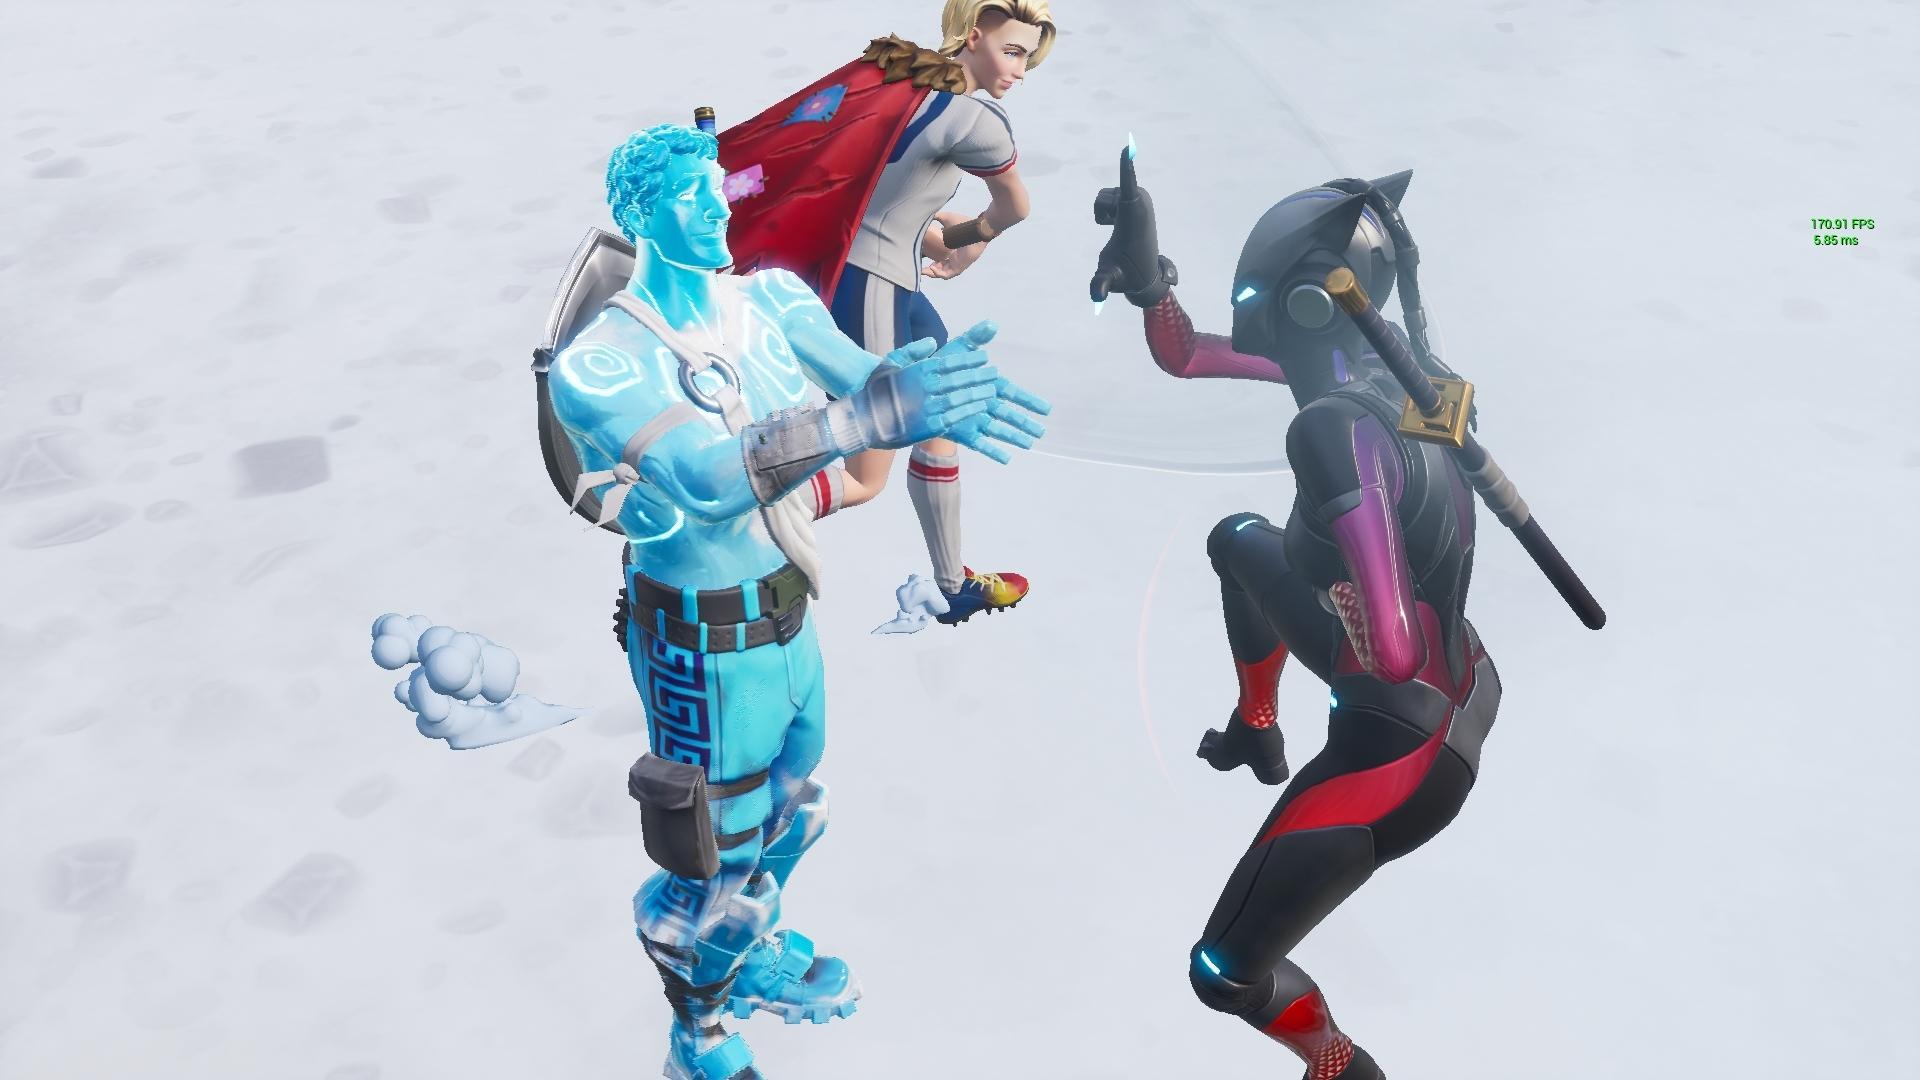 I just ran into the Frozen Love Ranger in game somehow?